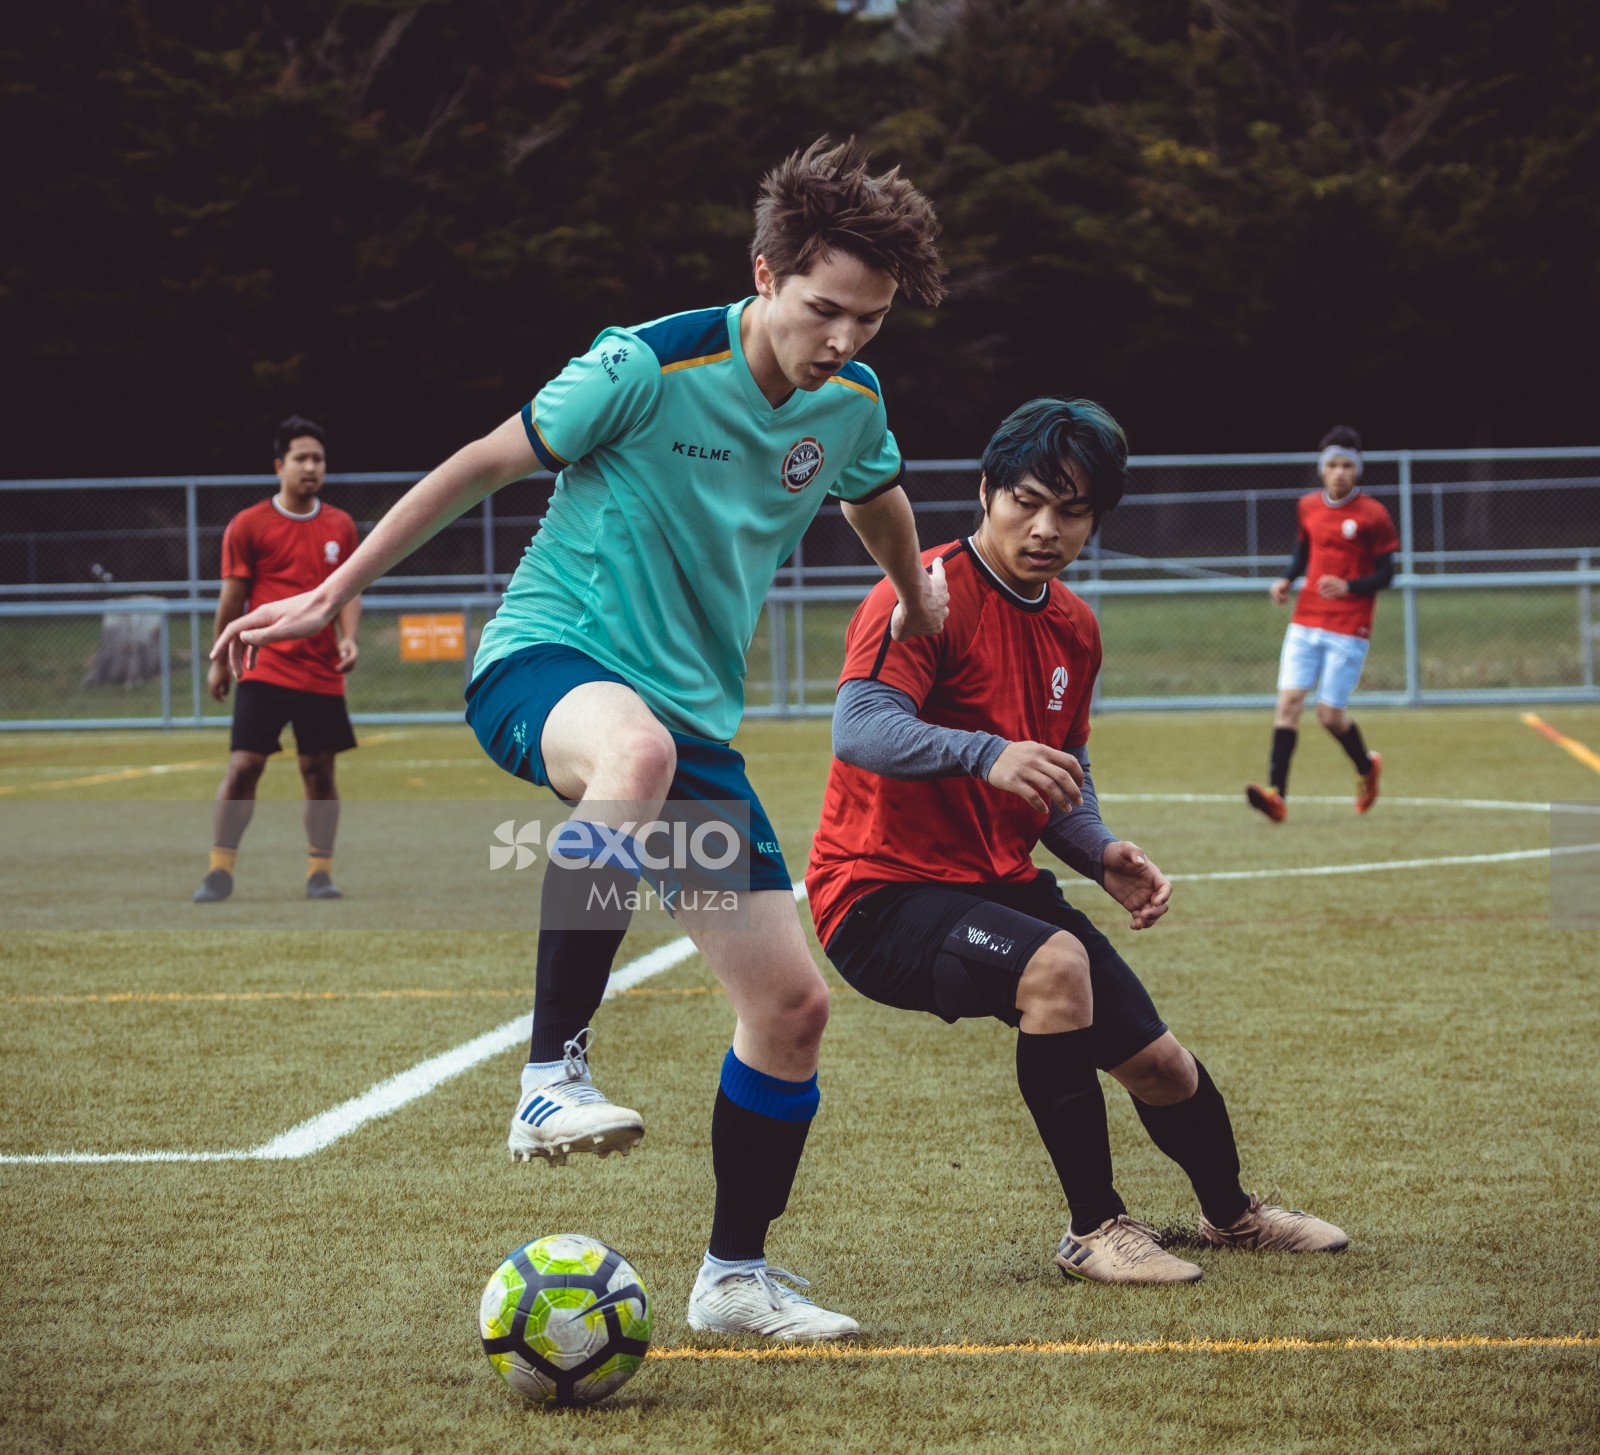 Player in turquoise Kelme shirt stomping on football - Sports Zone sunday league